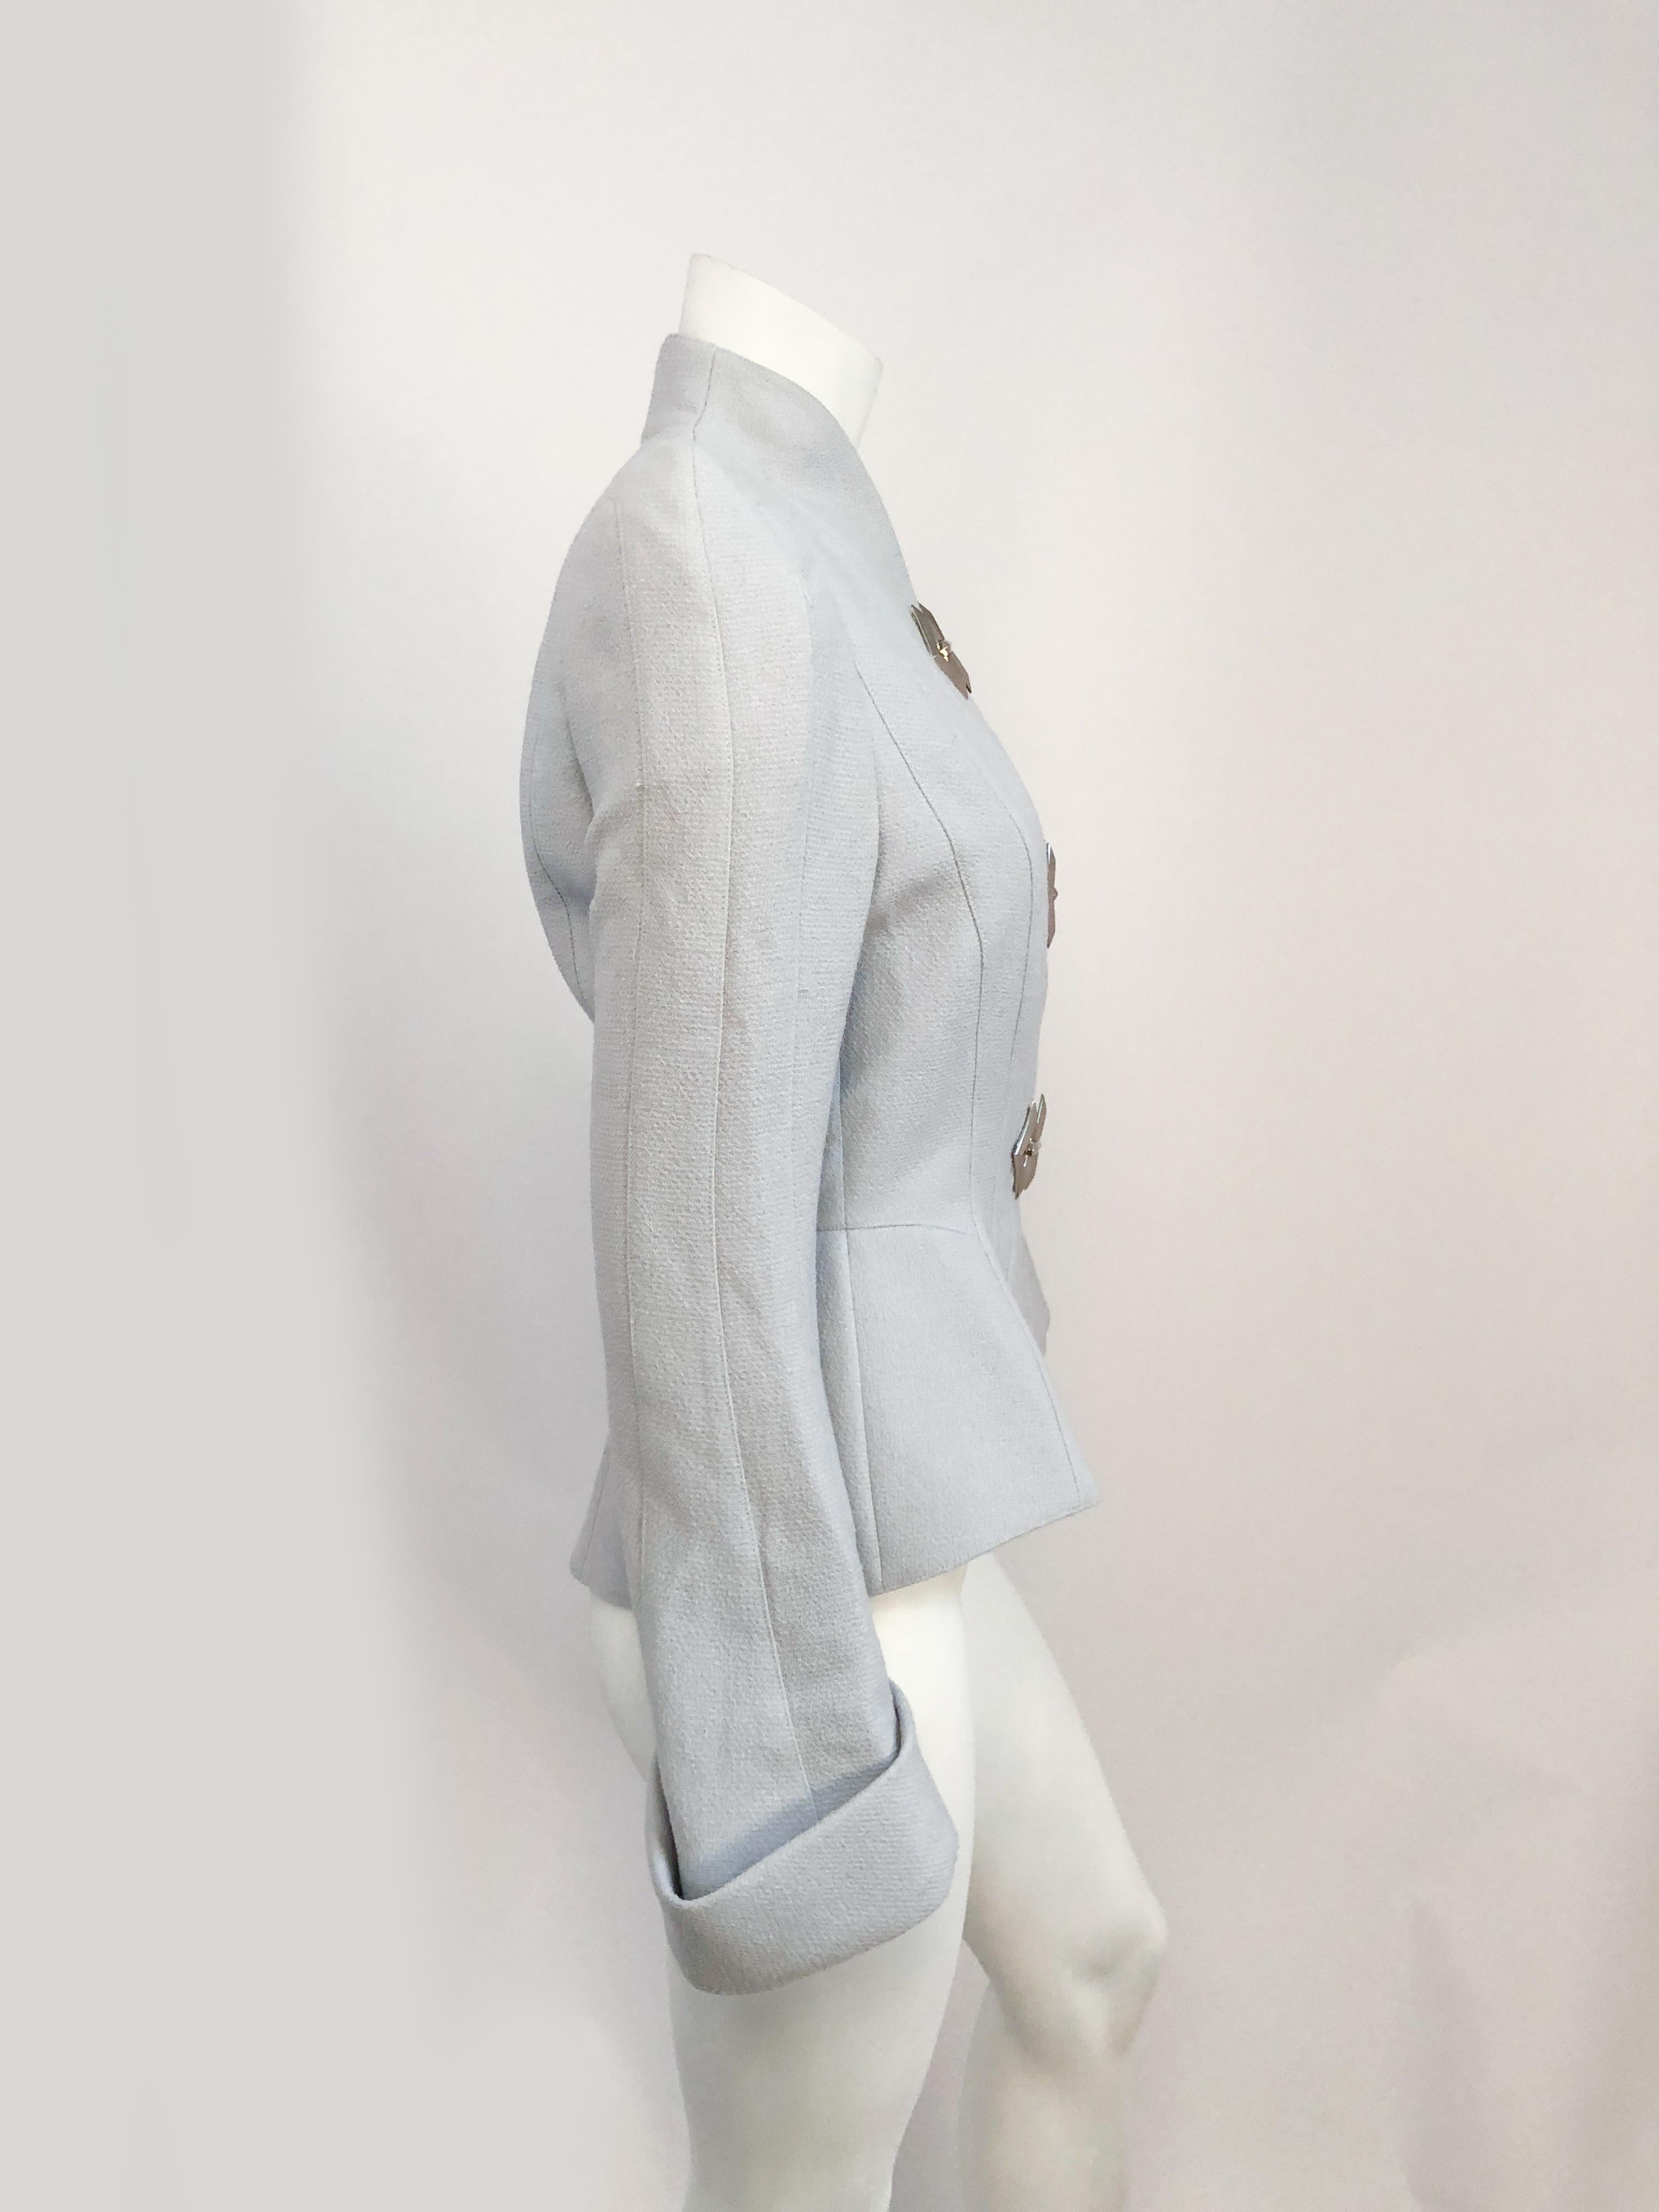 Gray 1980s Theirry Mugler Grey Paneled Jacket with Silver-toned Adornments